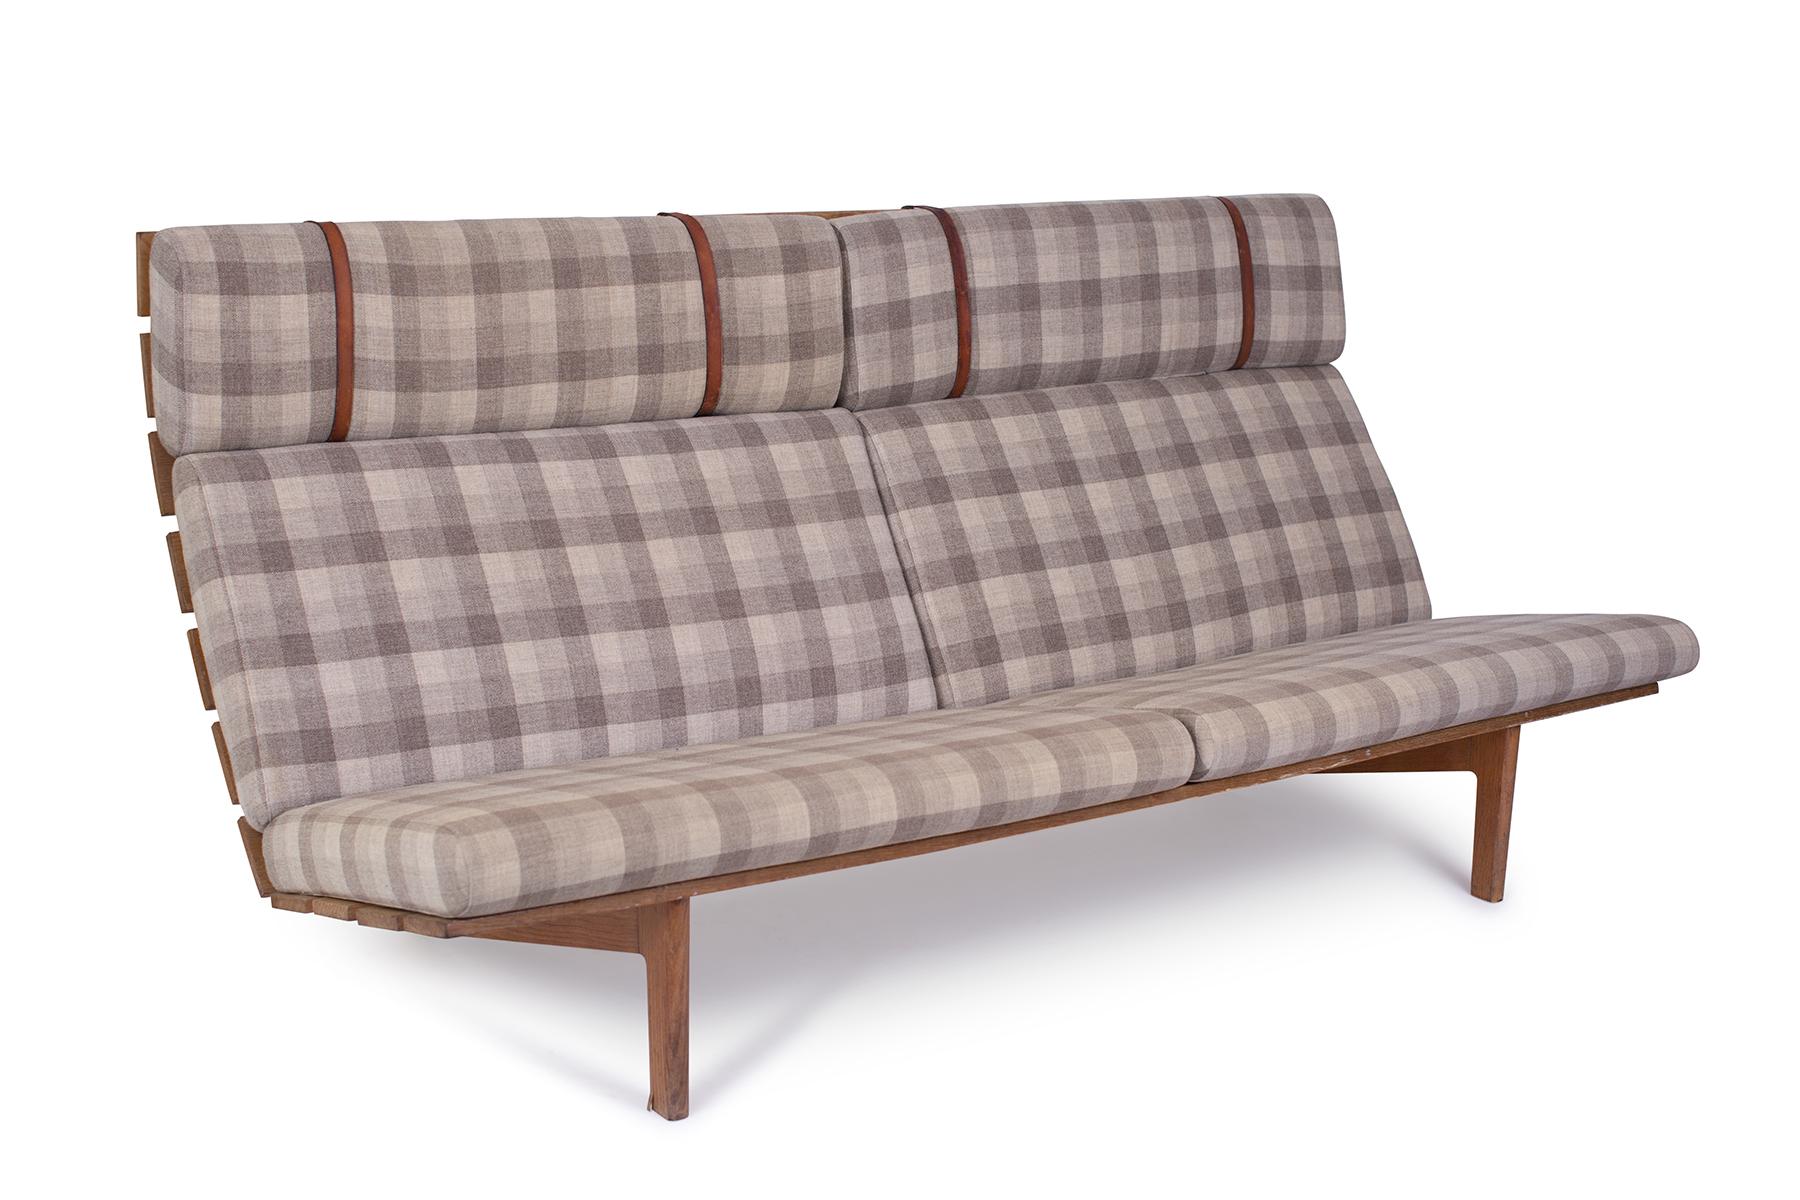 Erik Ole Jorgensen oak and upholstered bench or sofa, circa mid-1950s. This all original example has solid oak planks for the seats and backs. The legs are sculpted solid oak. Upholstery and leather straps are all original. Upholstery could use a